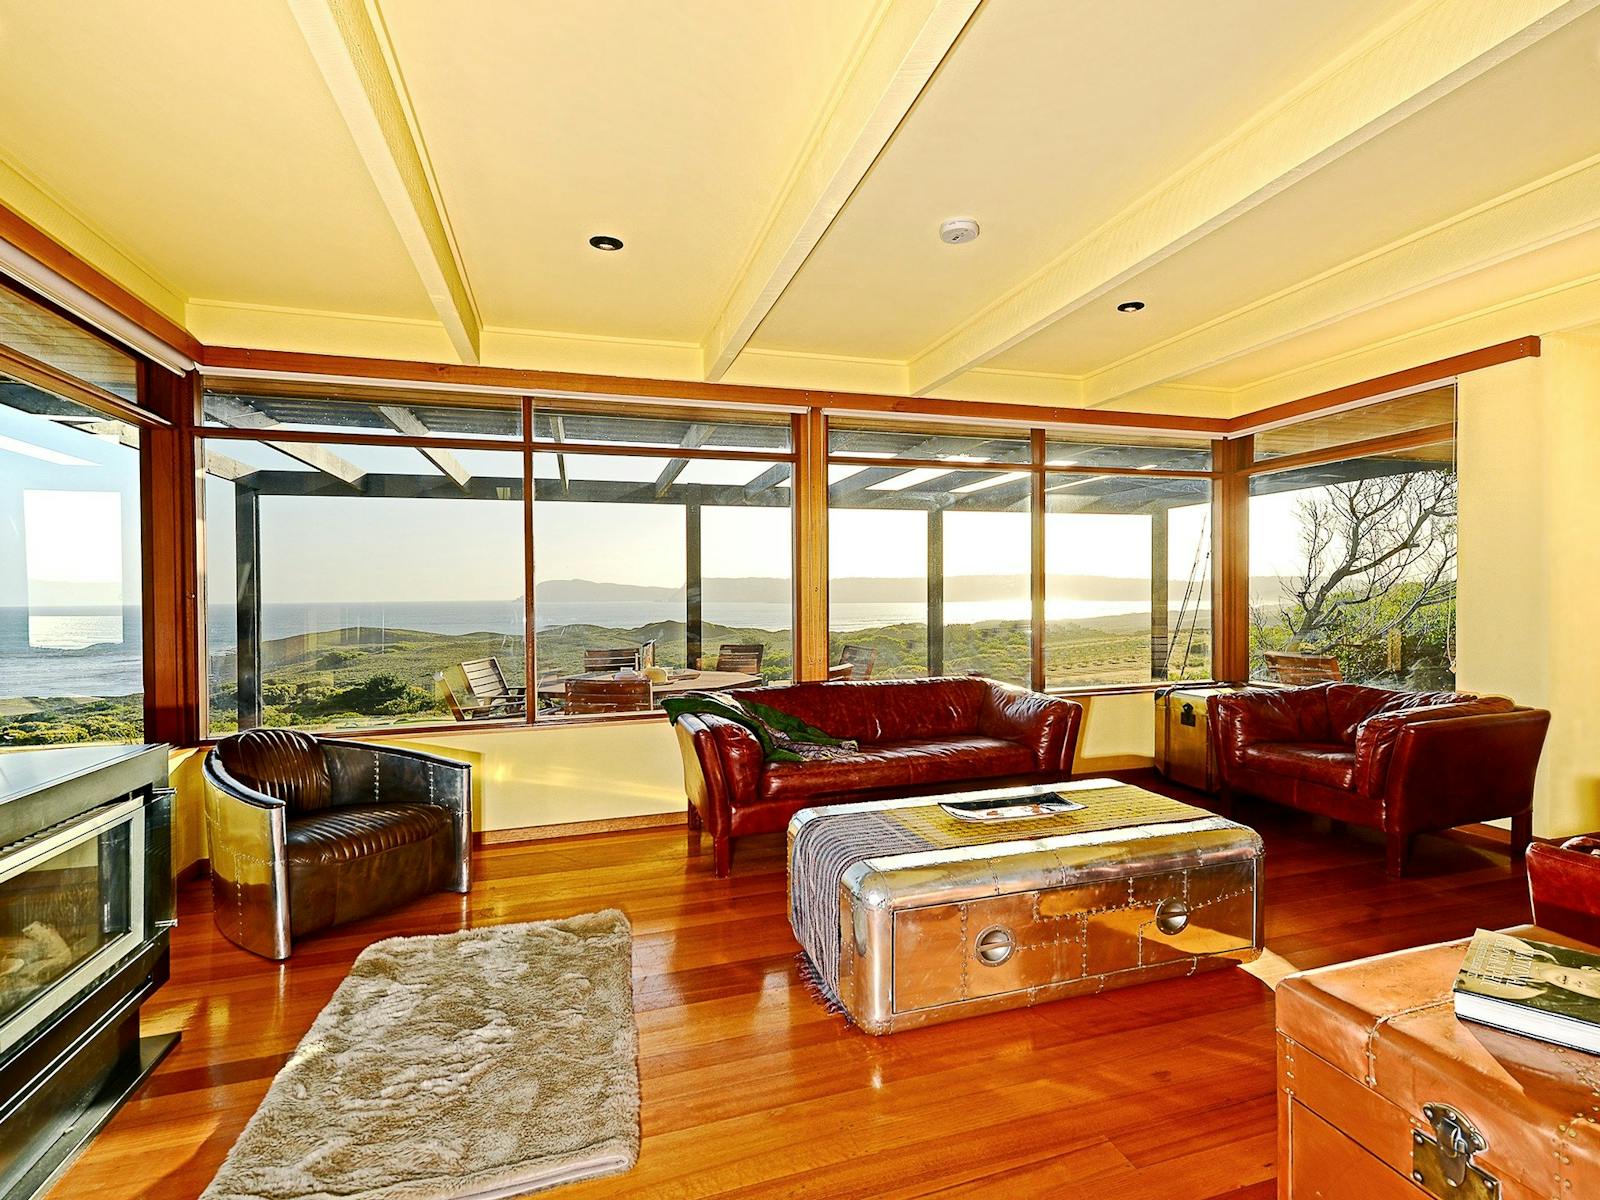 Cloudy Bay Villa - Loung area with wood heater